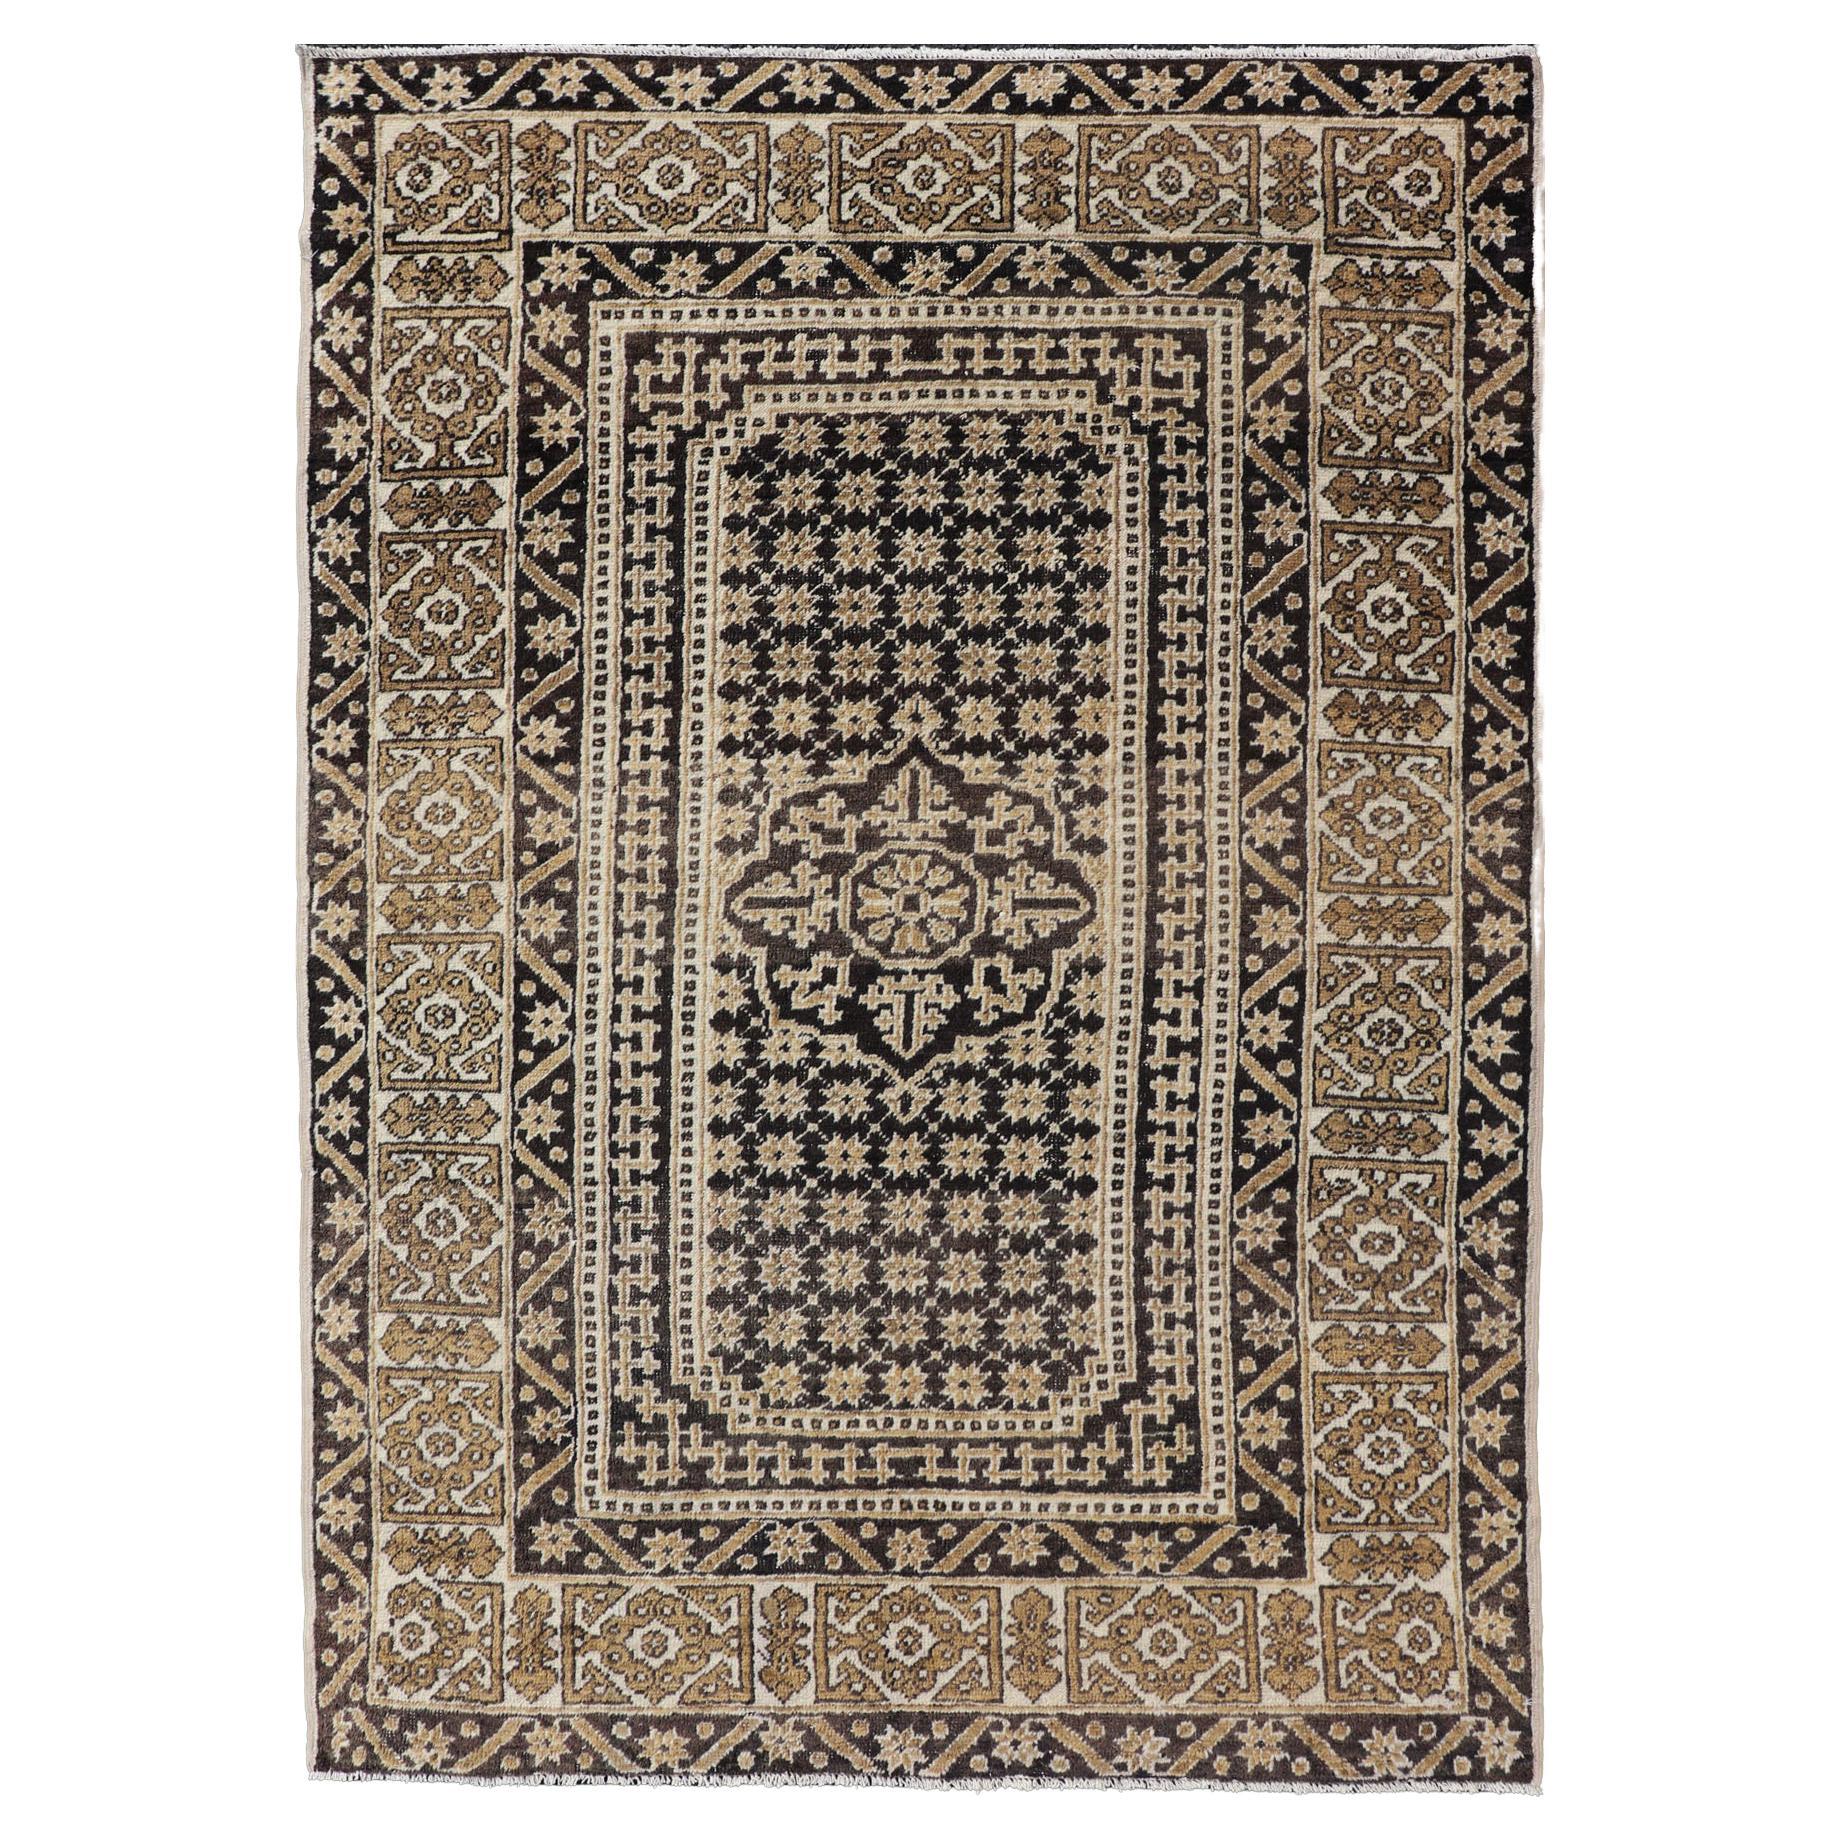 All-Over with Medallion Design Turkish Carpet in Shades of Brown and Cream